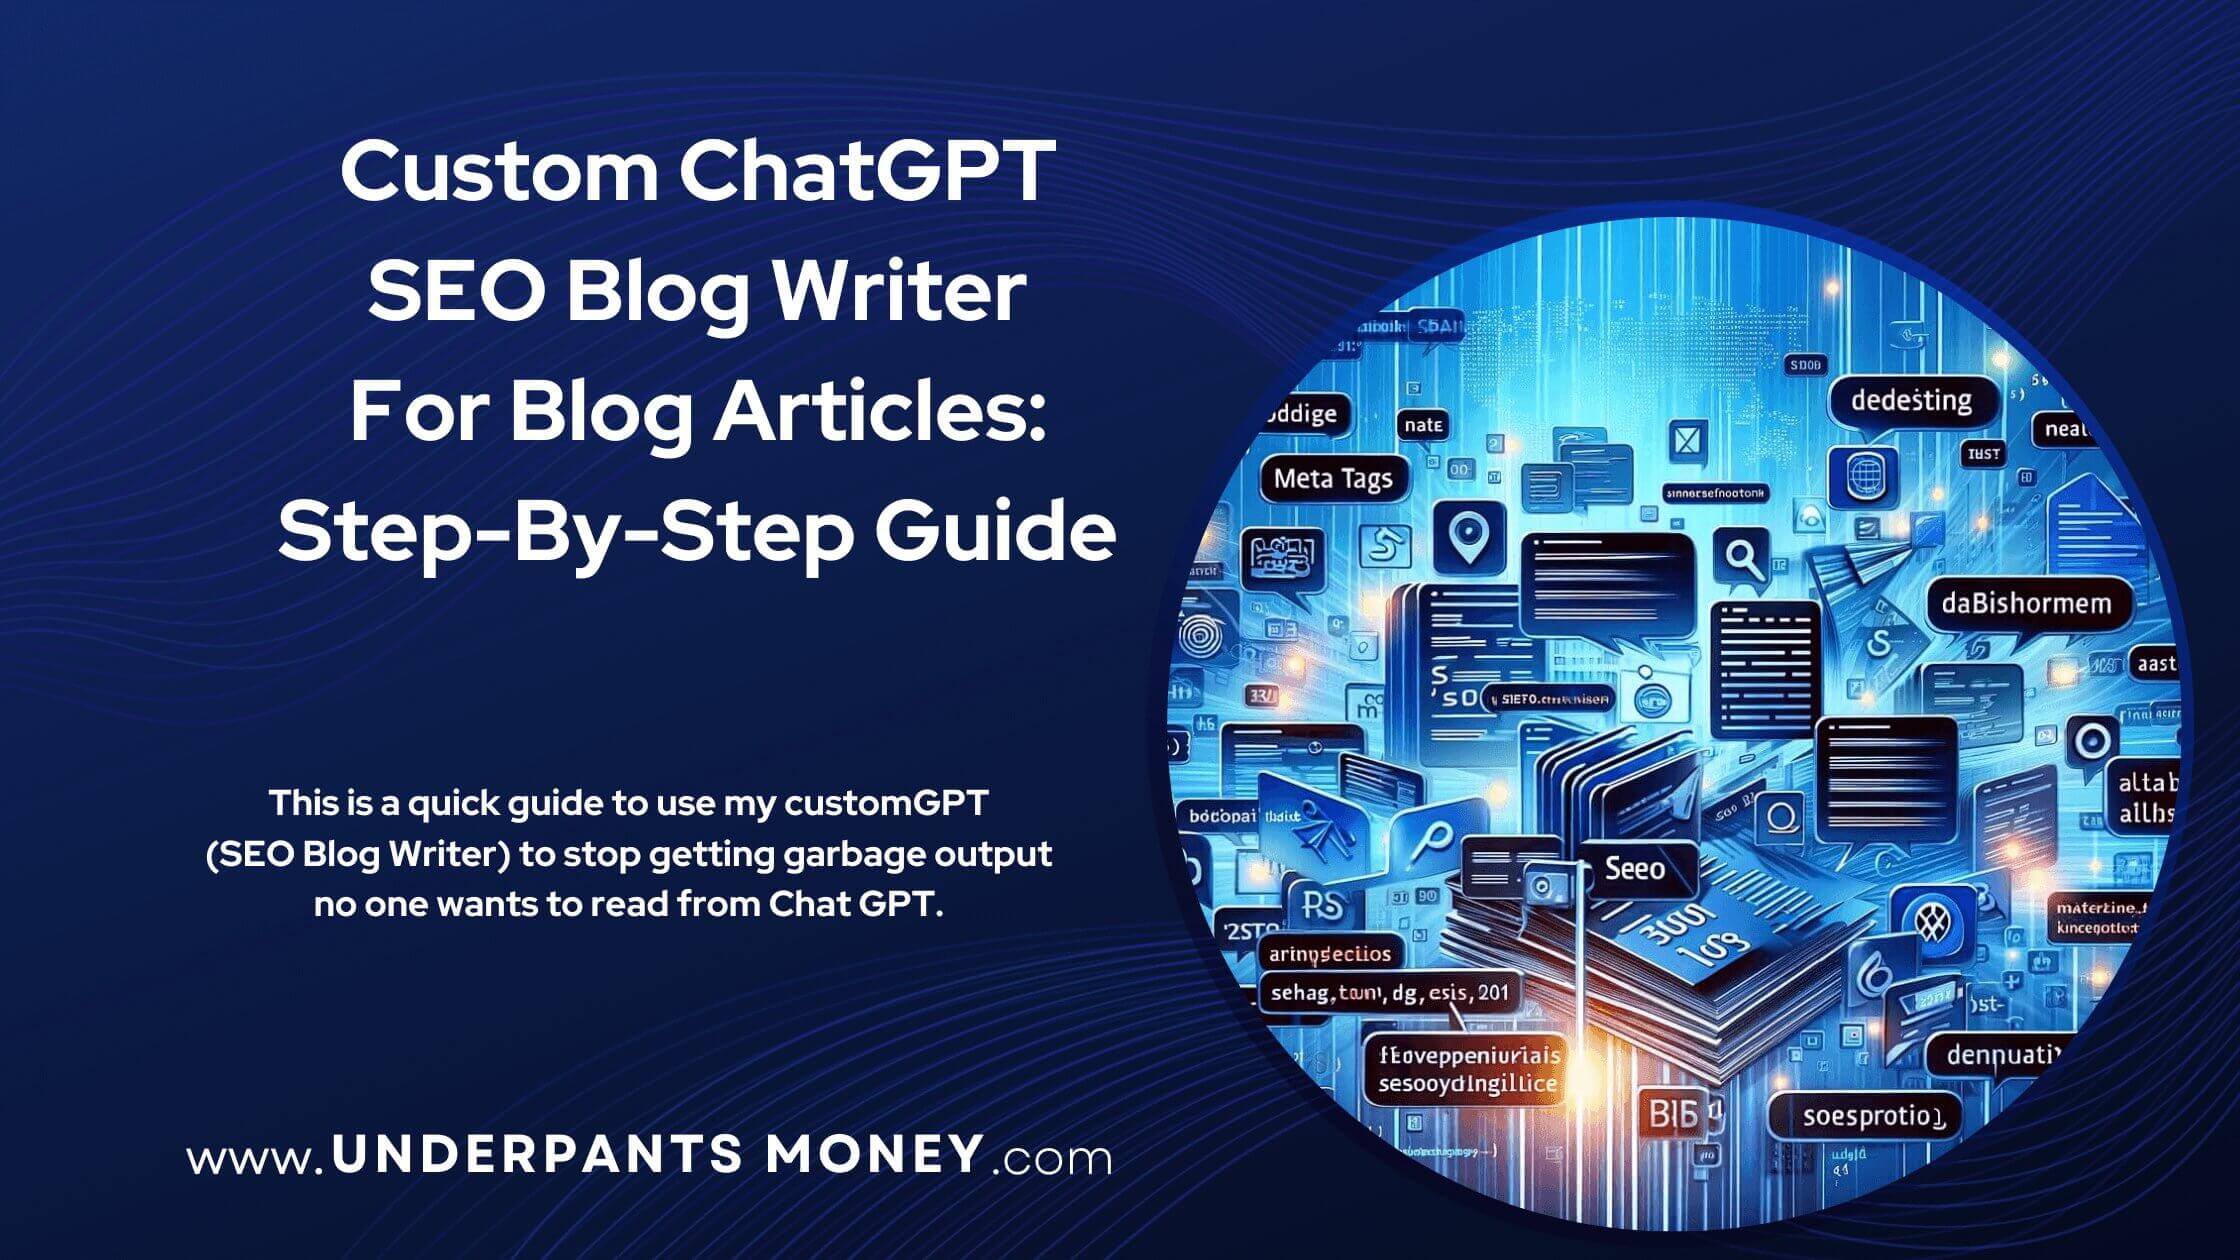 CustomGPT SEO Blog Writer title with description on blue next to image of blog elements floating in digital space